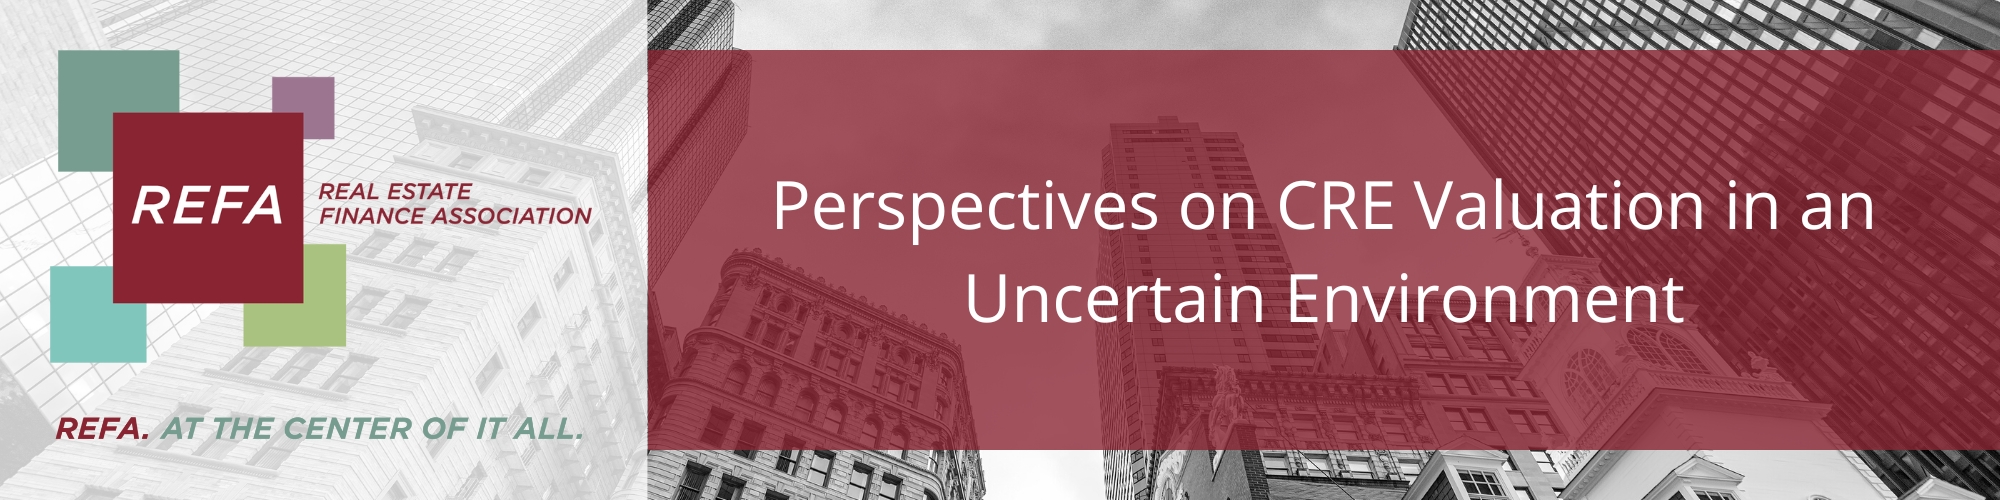 Perspectives on CRE Valuation in an Uncertain Environment